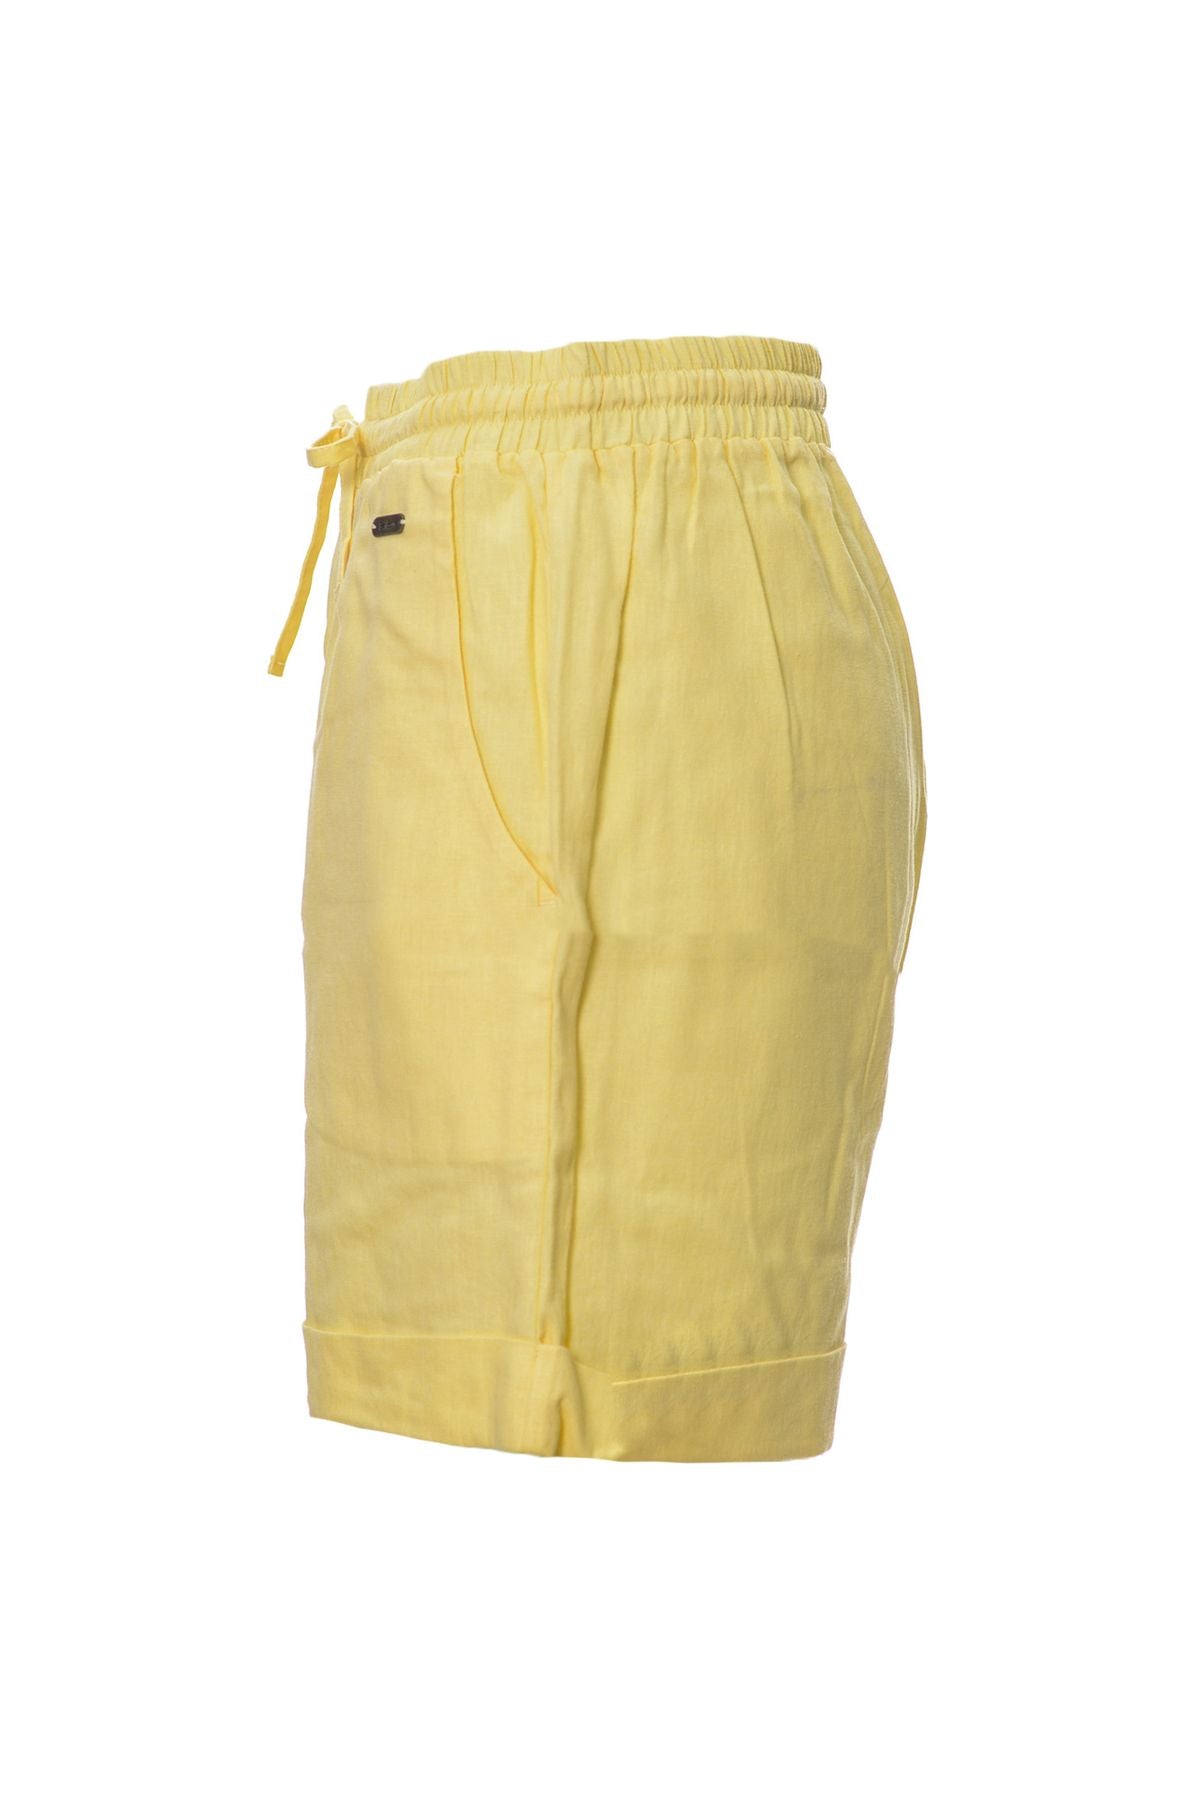 BARBOUR Spring/Summer Cotton Shorts